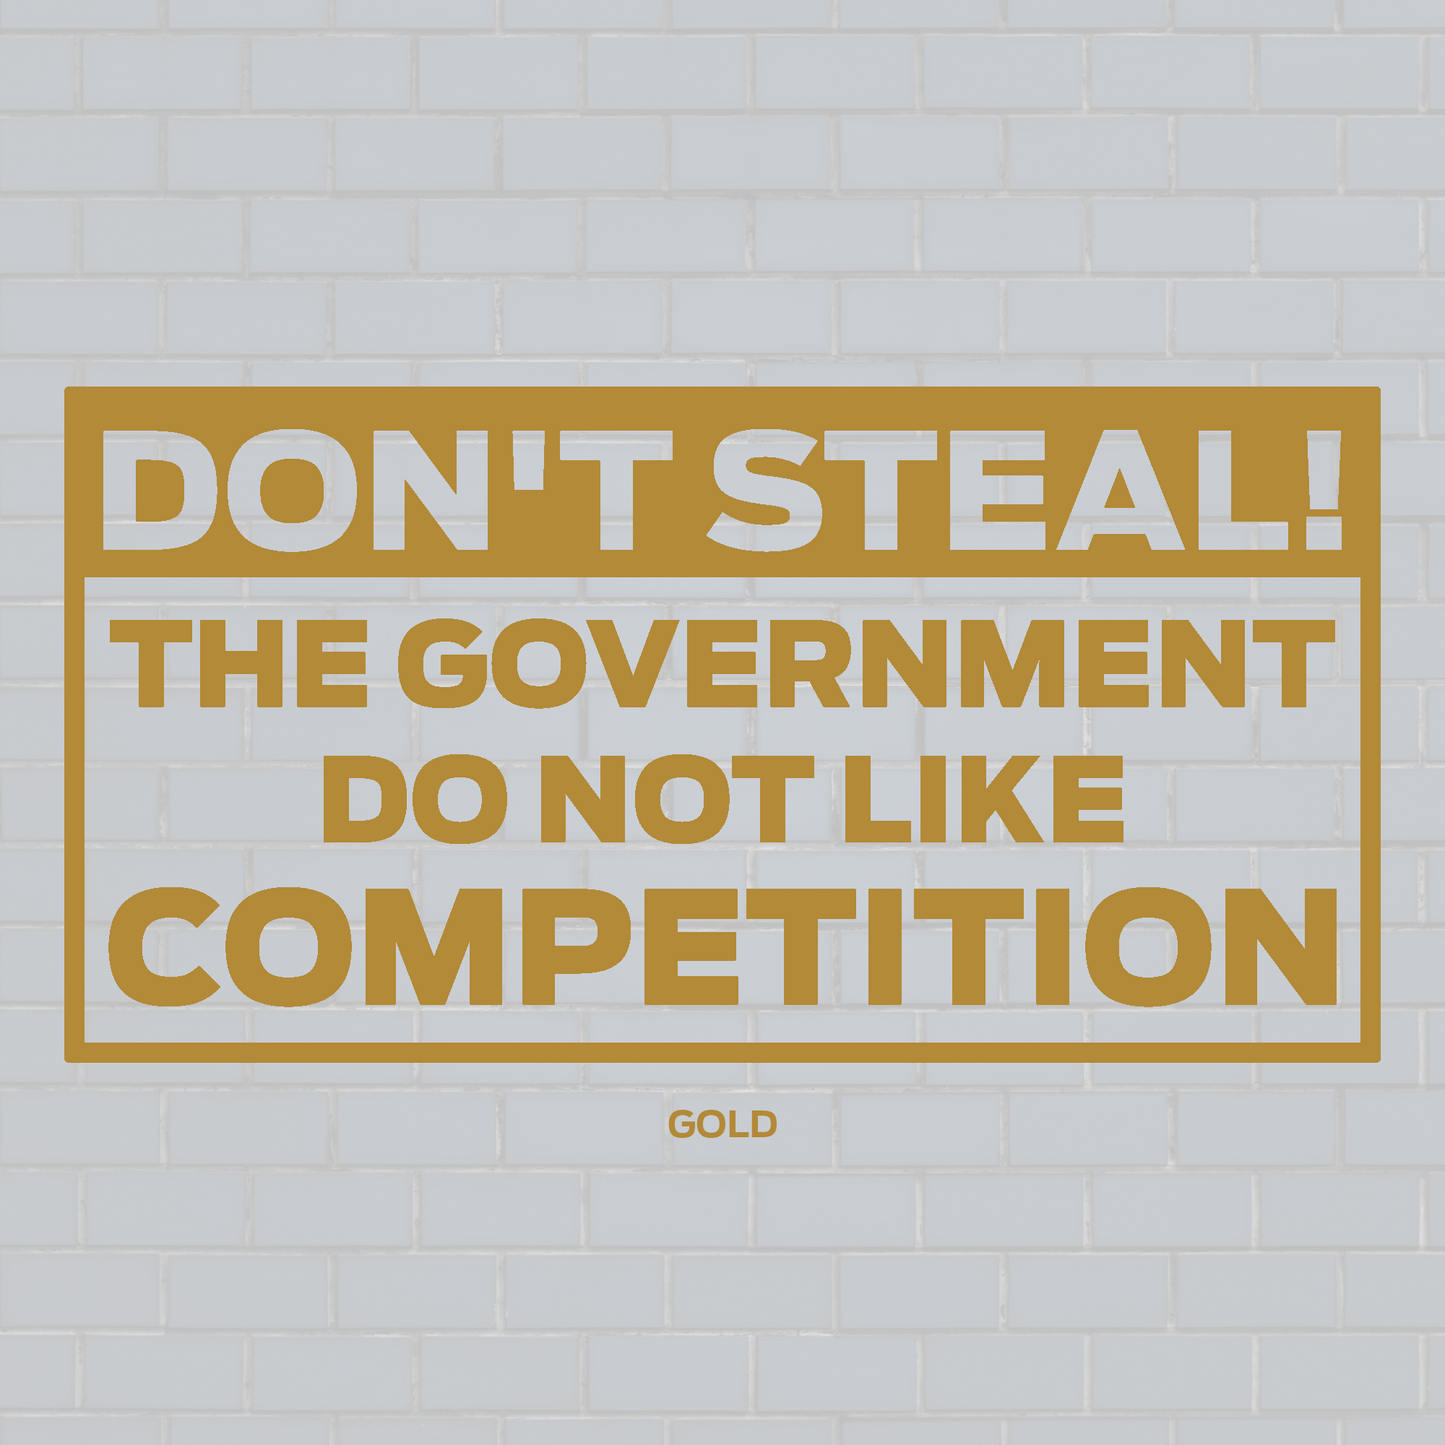 Don't steal, The government don't like the competition vinyl decal